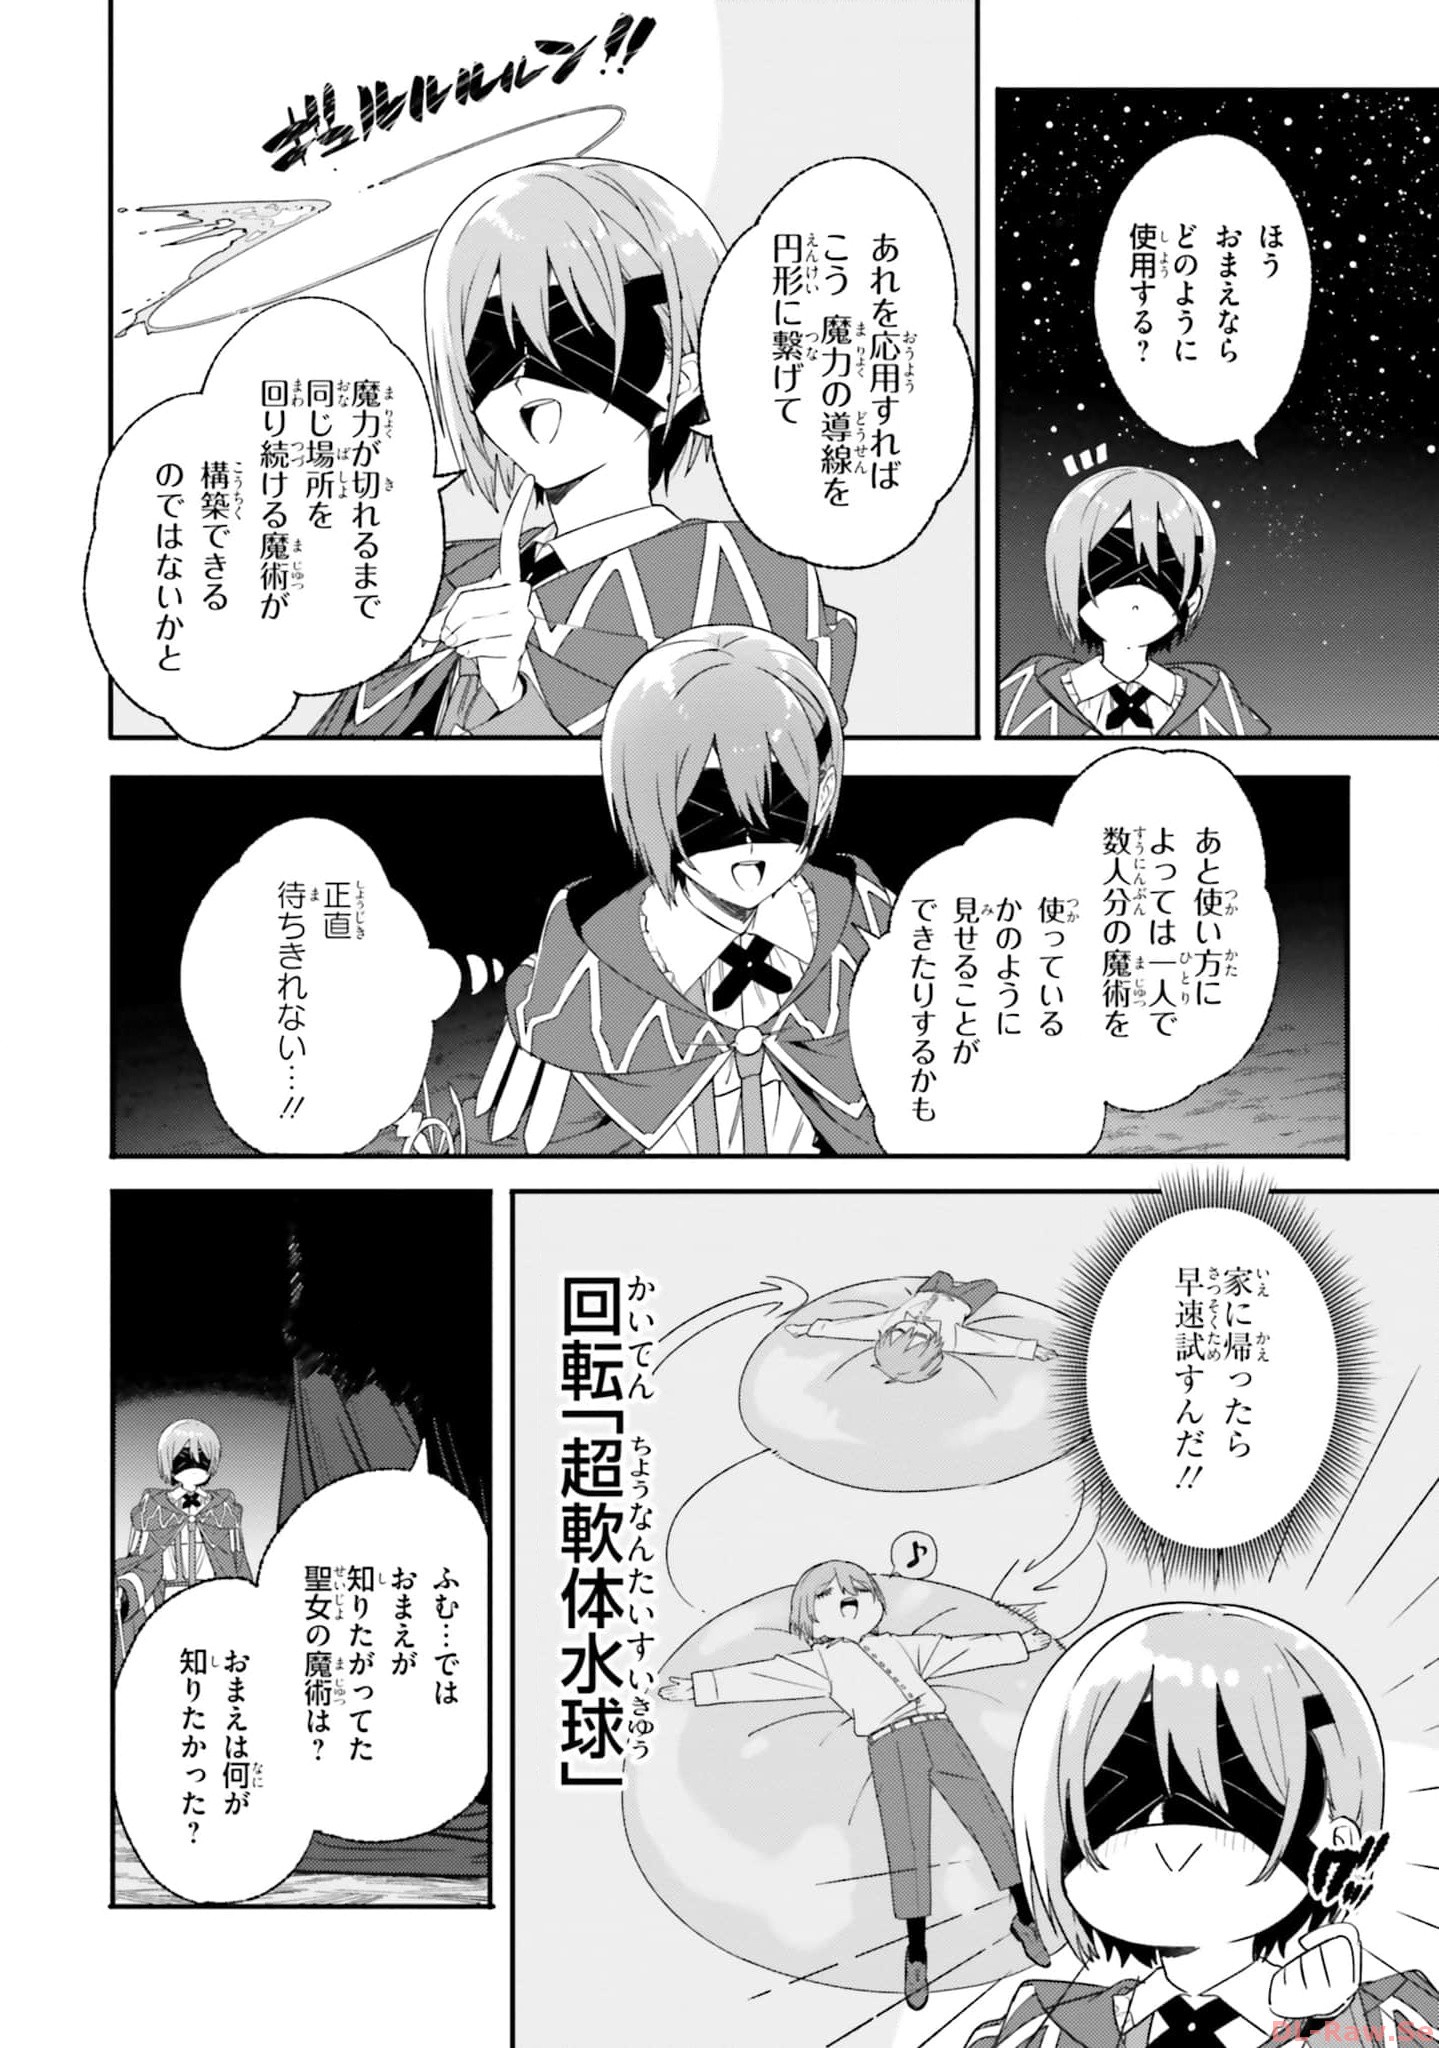 Kunon the Sorcerer Can See Kunon the Sorcerer Can See Through 魔術師クノンは見えている 第17話 - Page 20